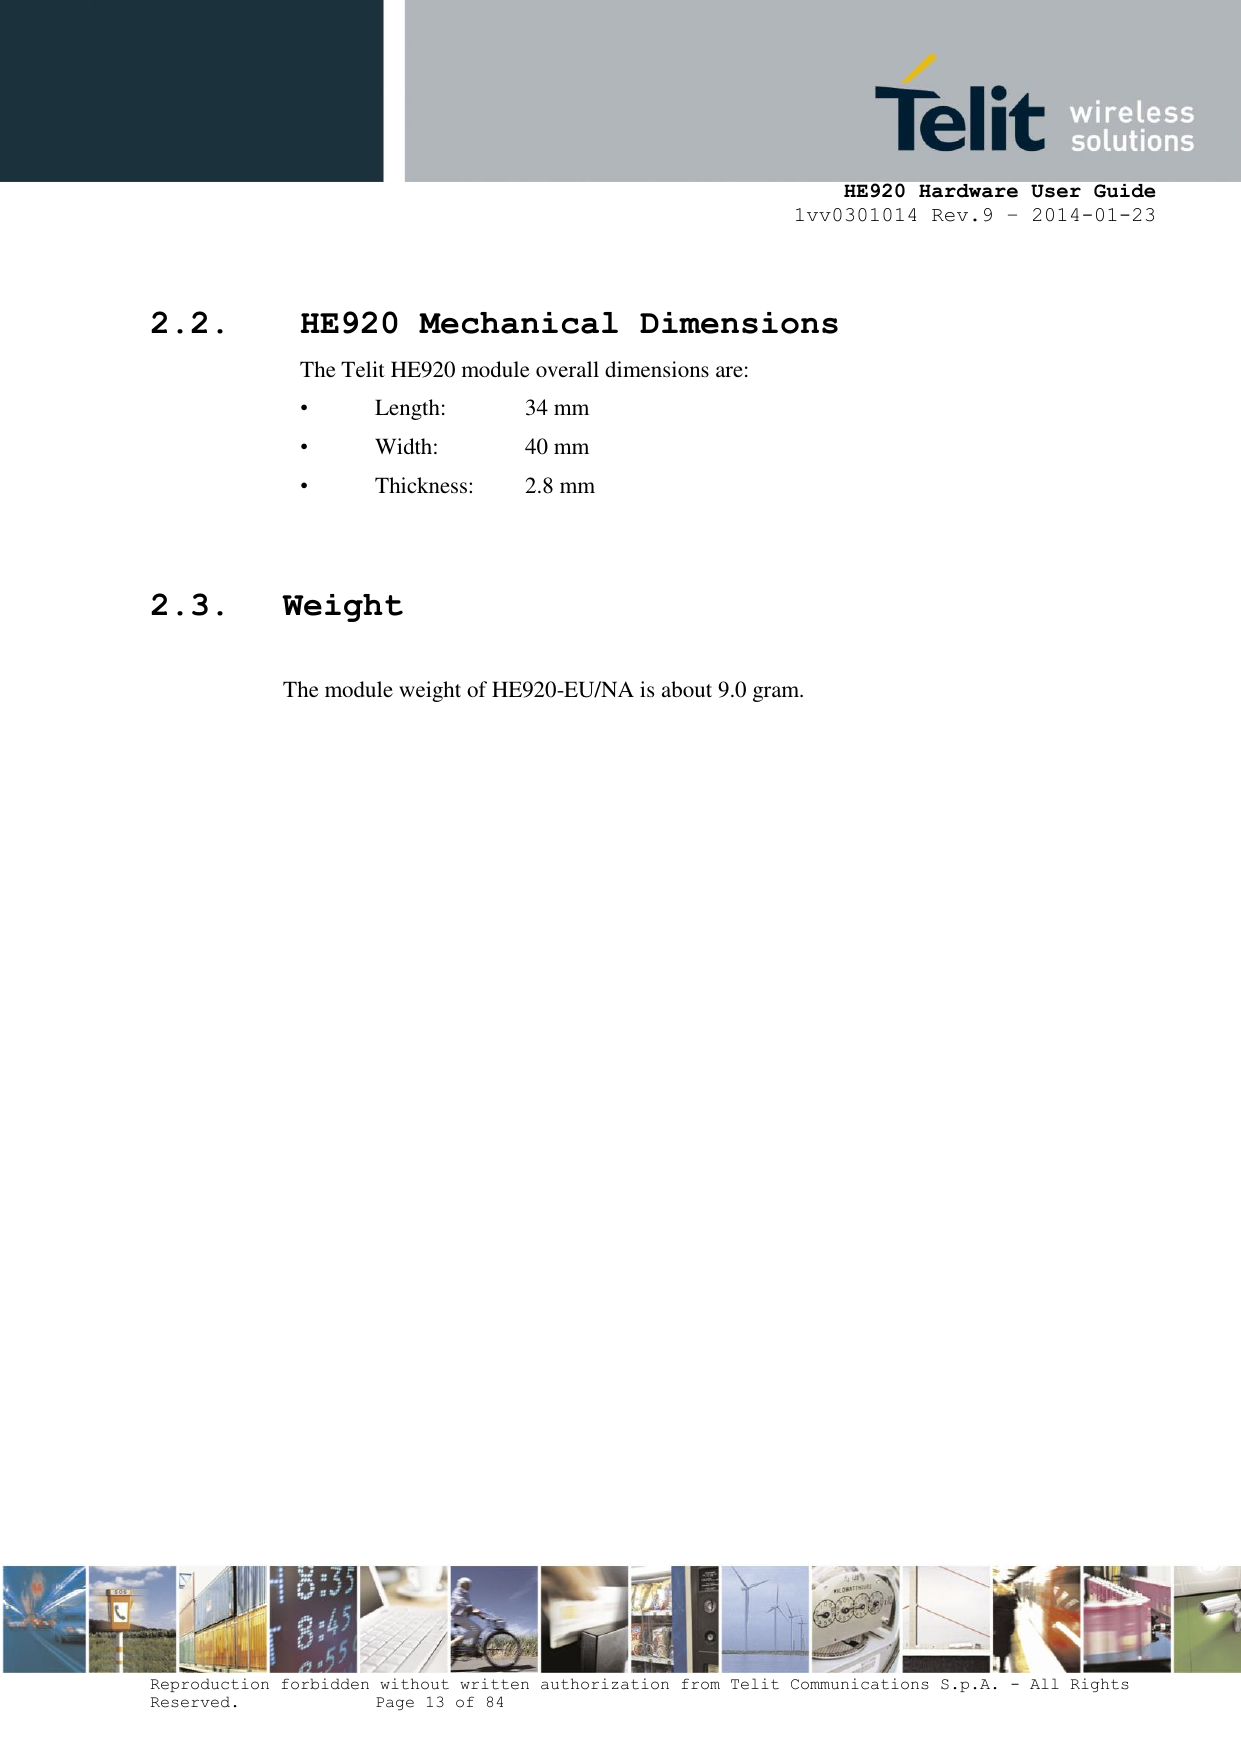     HE920 Hardware User Guide 1vv0301014 Rev.9 – 2014-01-23 Reproduction forbidden without written authorization from Telit Communications S.p.A. - All Rights Reserved.    Page 13 of 84   2.2. HE920 Mechanical Dimensions The Telit HE920 module overall dimensions are:  •  Length:   34 mm •  Width:    40 mm •  Thickness:   2.8 mm  2.3. Weight  The module weight of HE920-EU/NA is about 9.0 gram.  